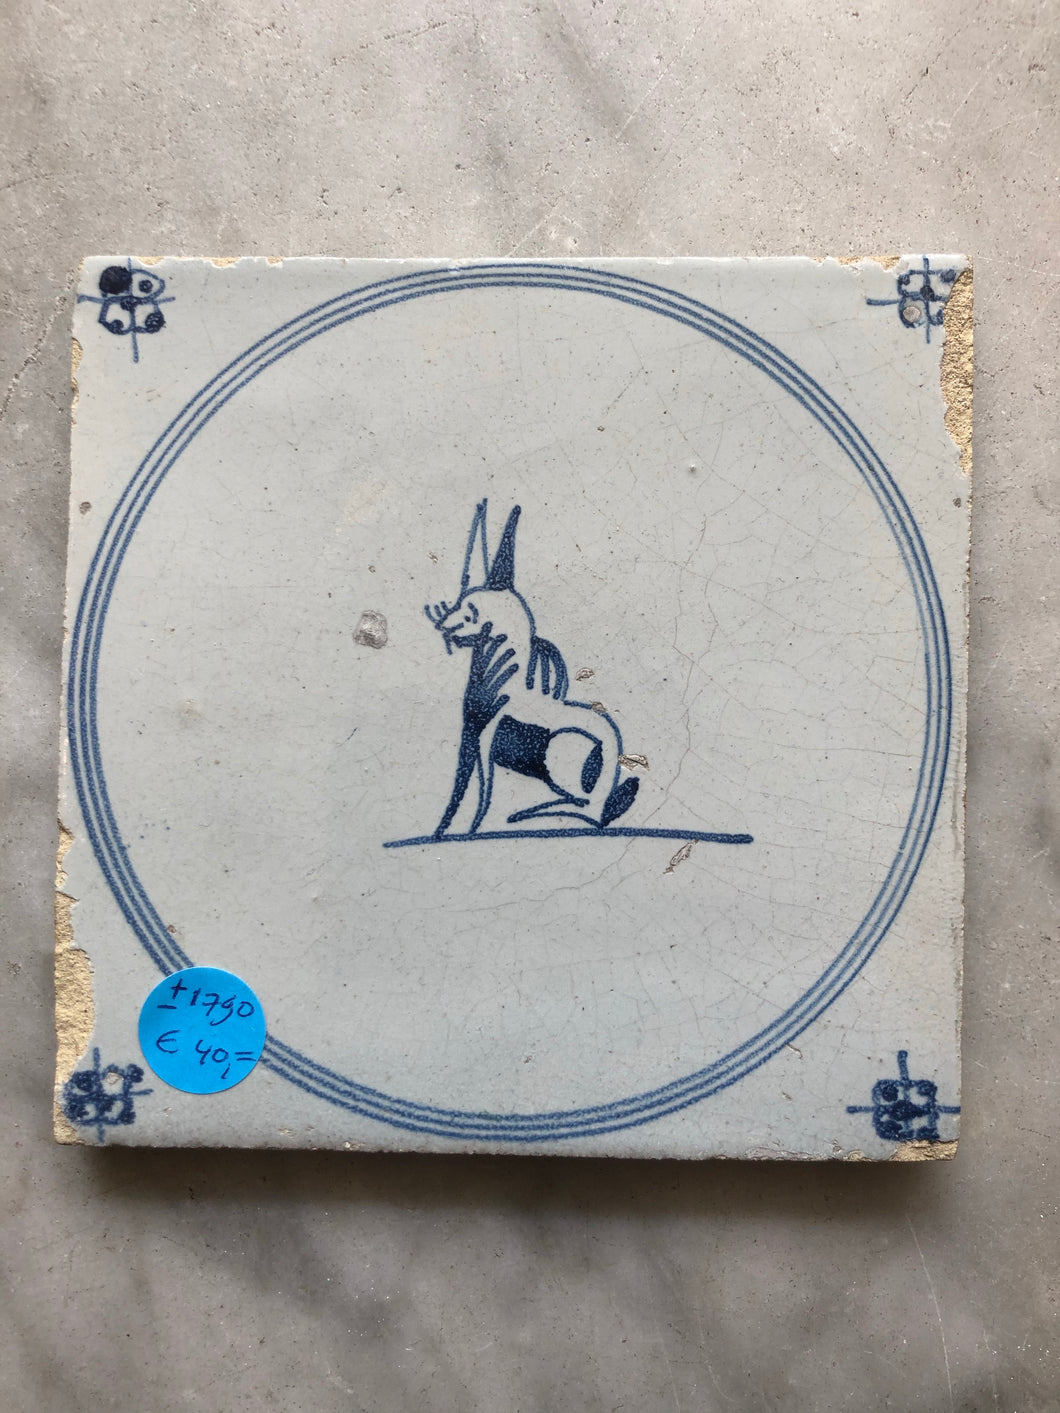 Delft 18 th century tile with animal